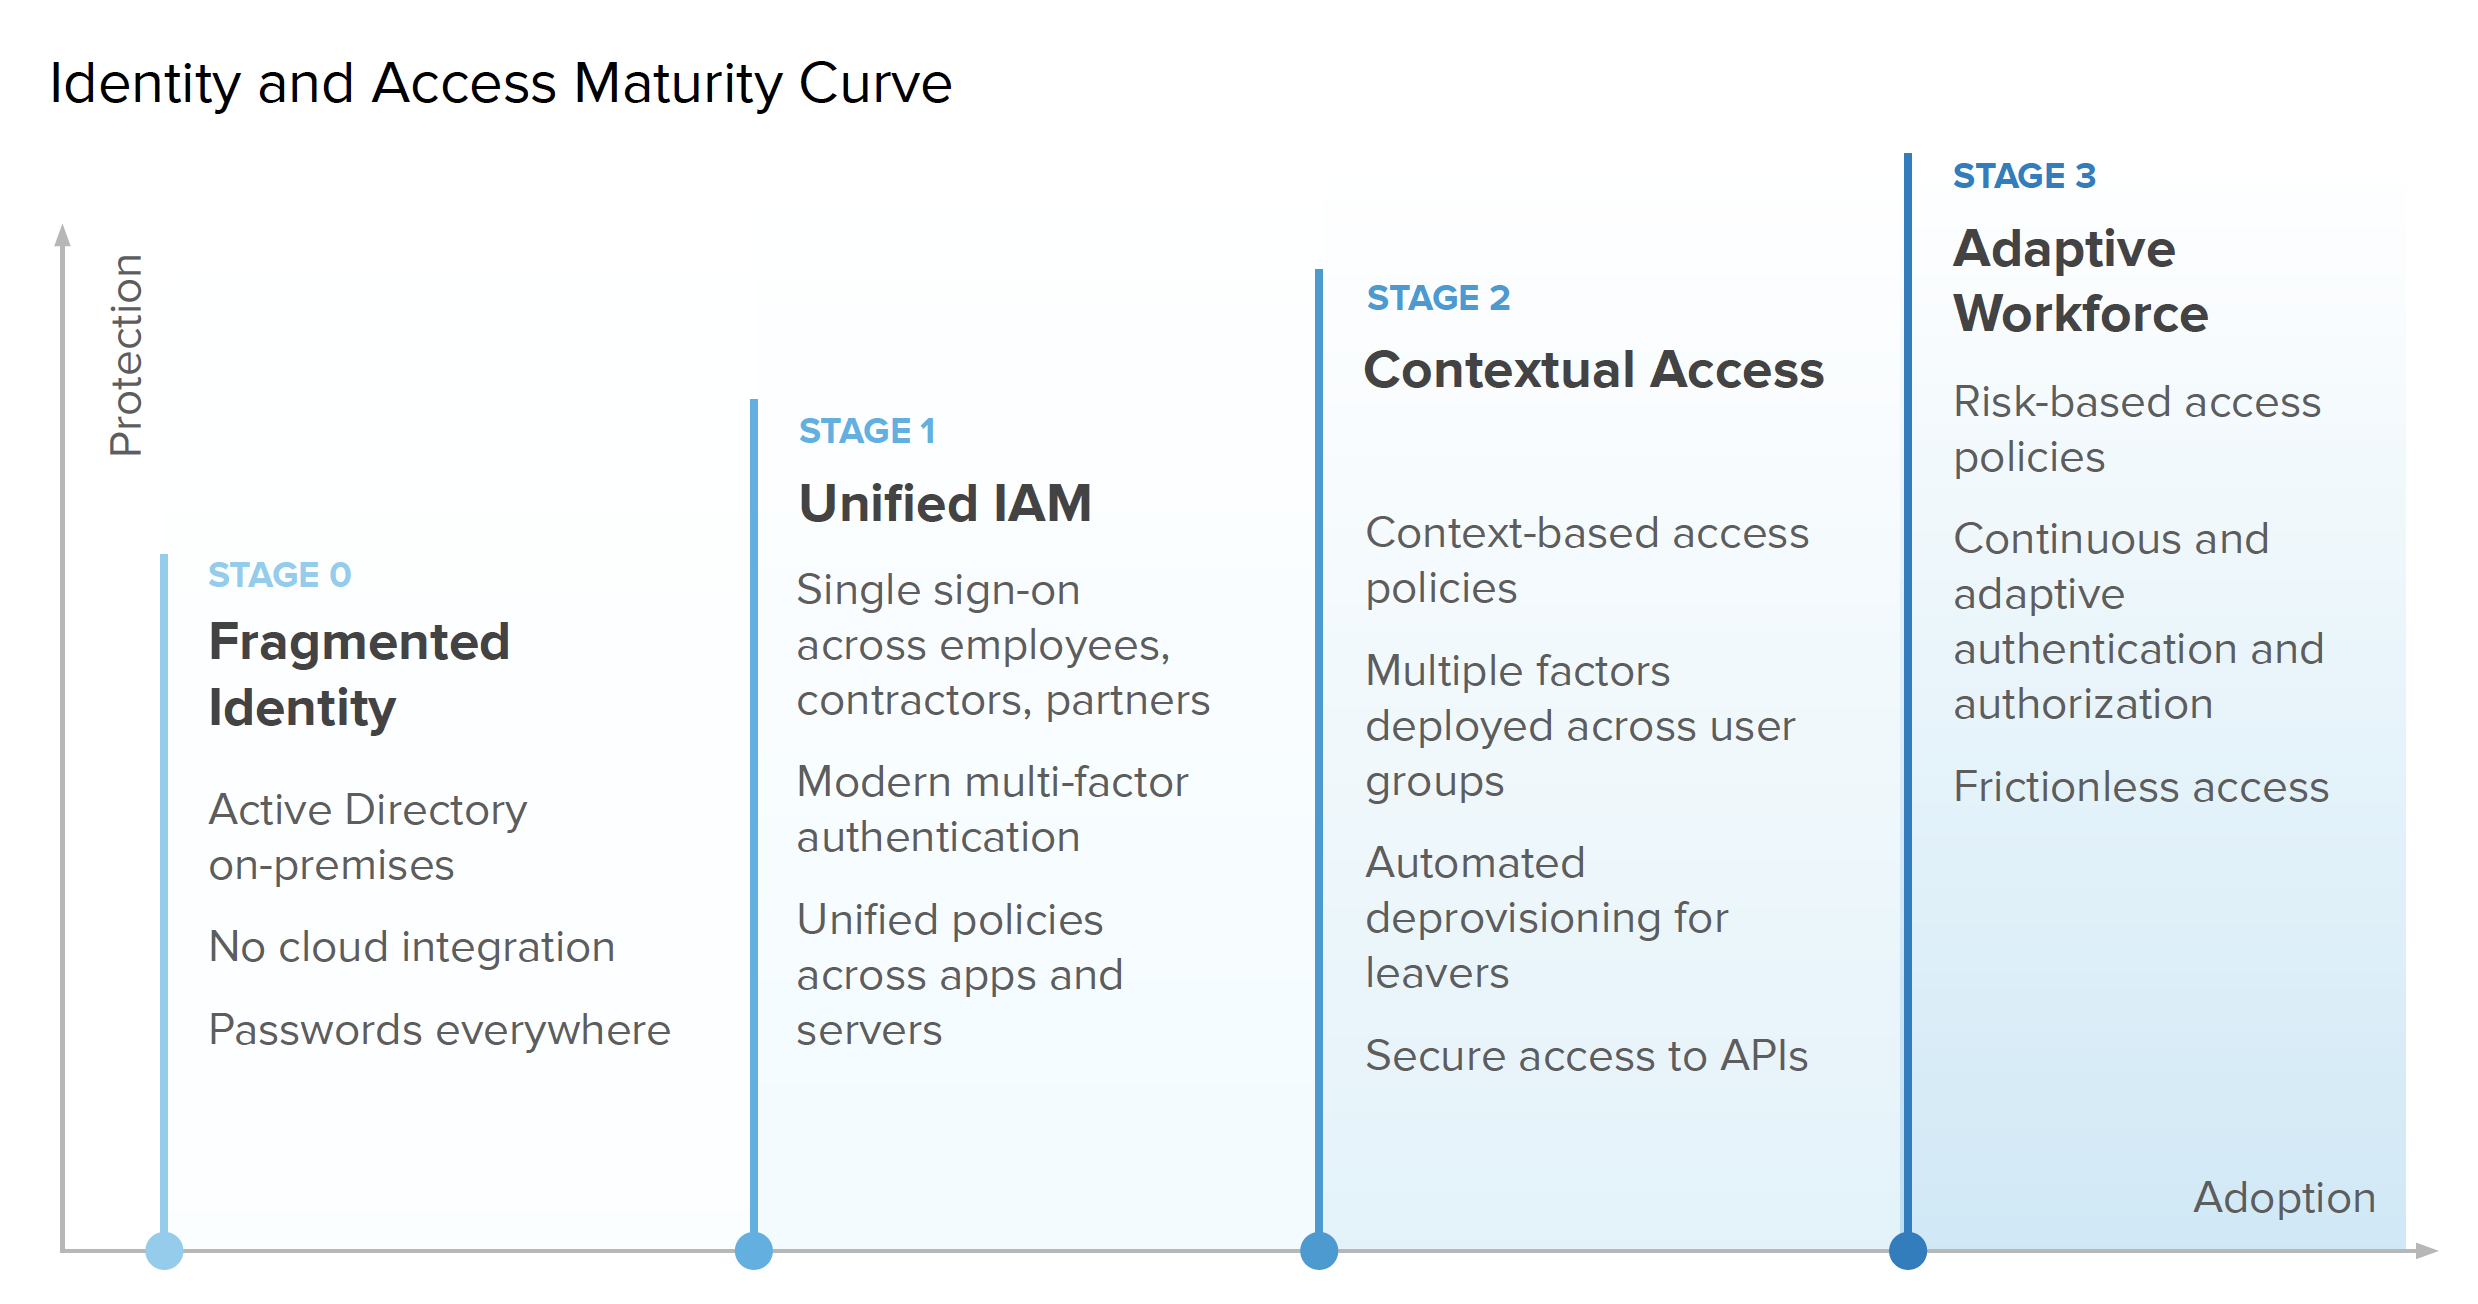 Identity and Access Maturity Curve